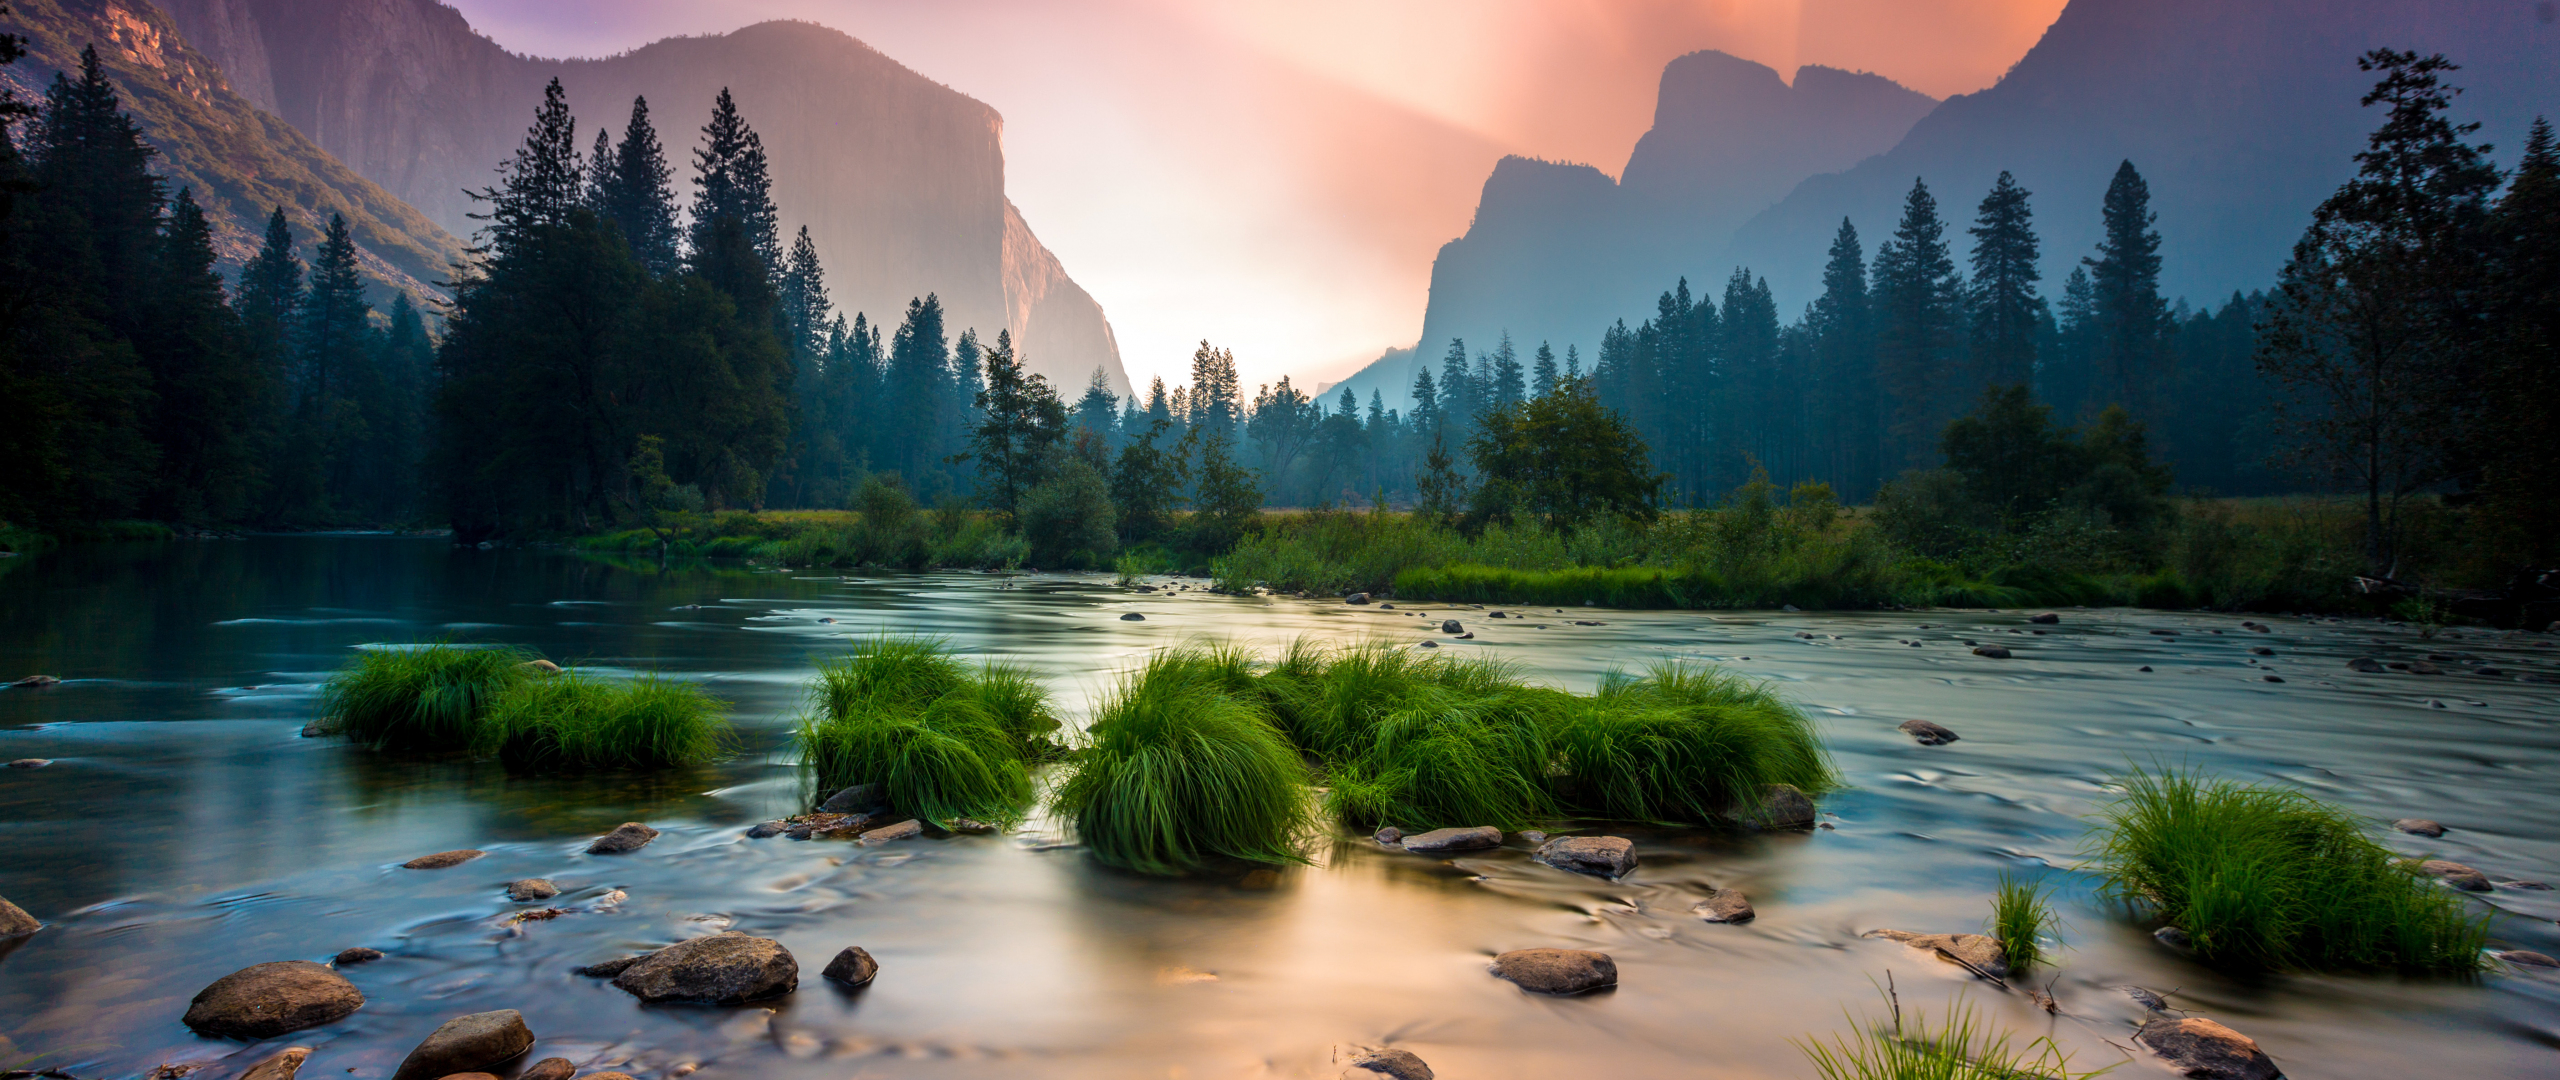 2560x1080 Download sunrise, yosemite national park, stream, mountains wallpaper, dual wide hd image, background, 18539